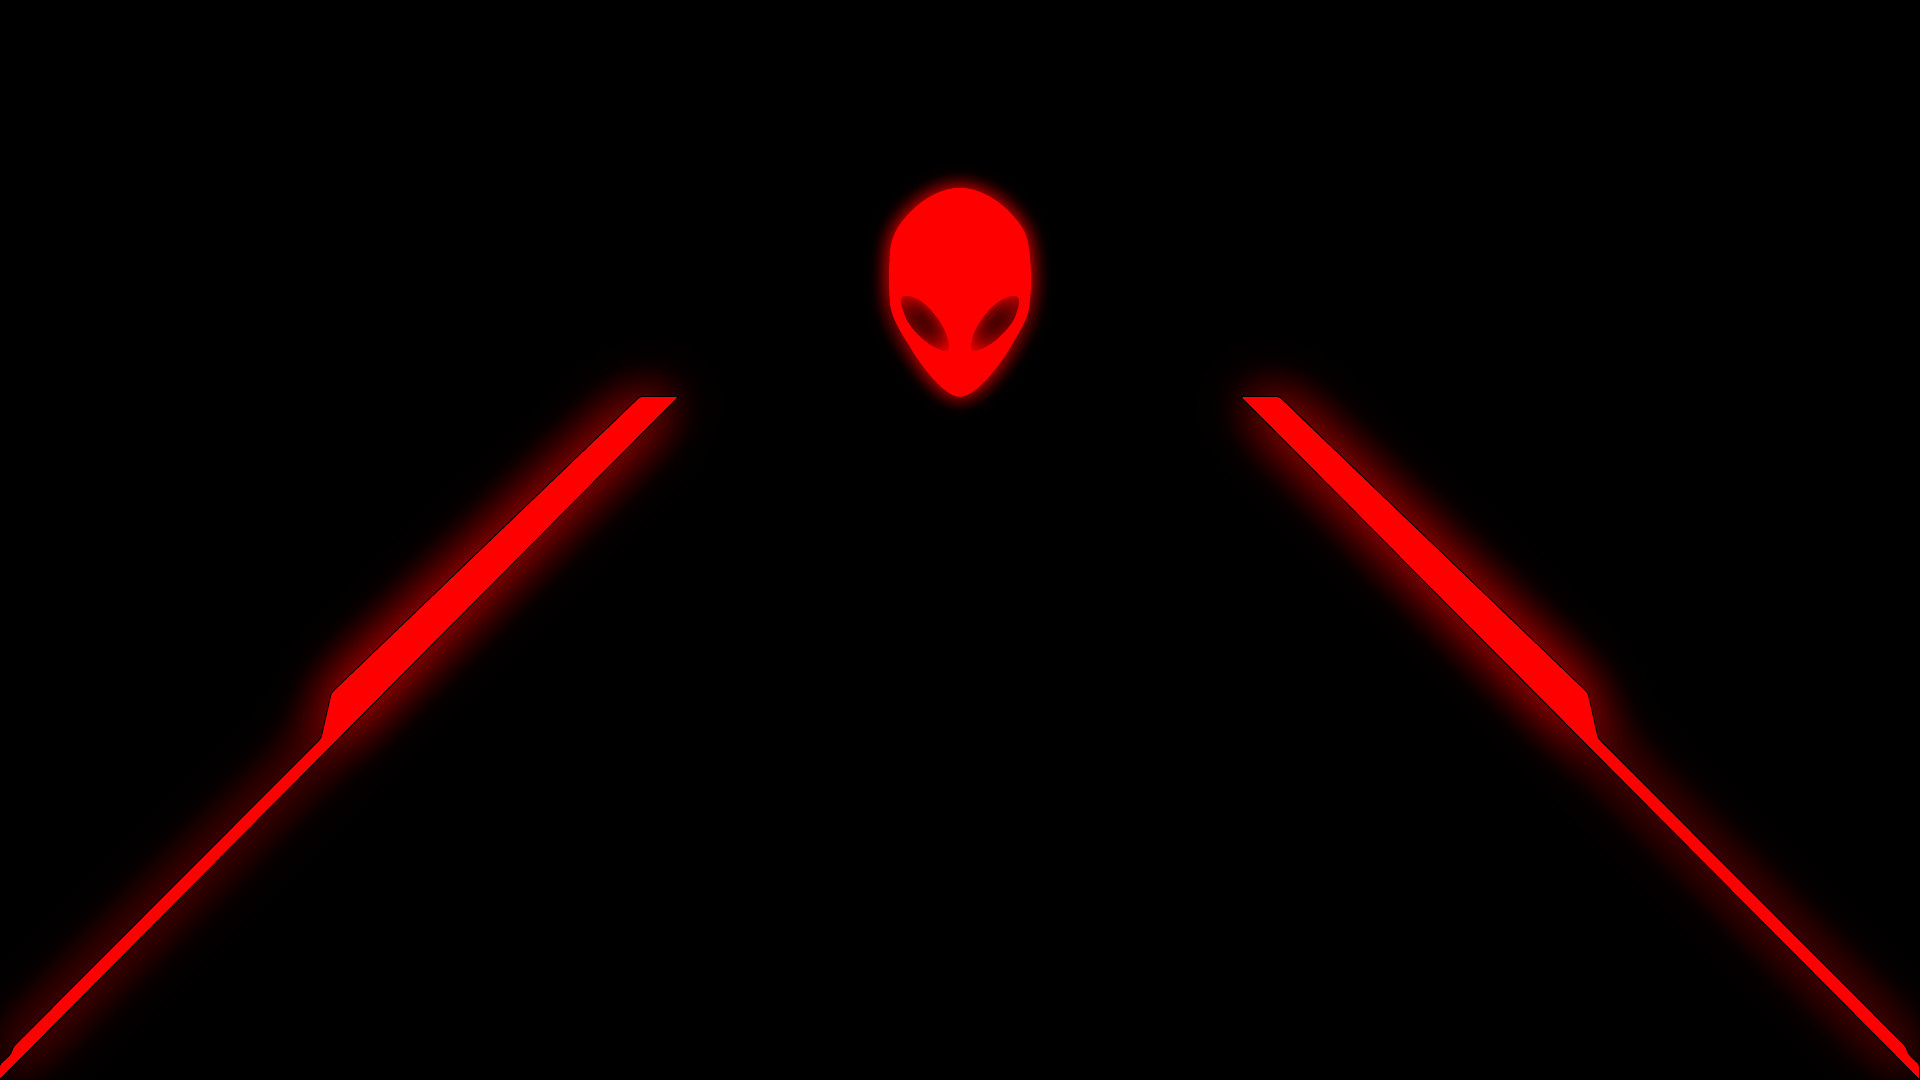 1920x1080 Black and Red Alienware Wallpaper 58802